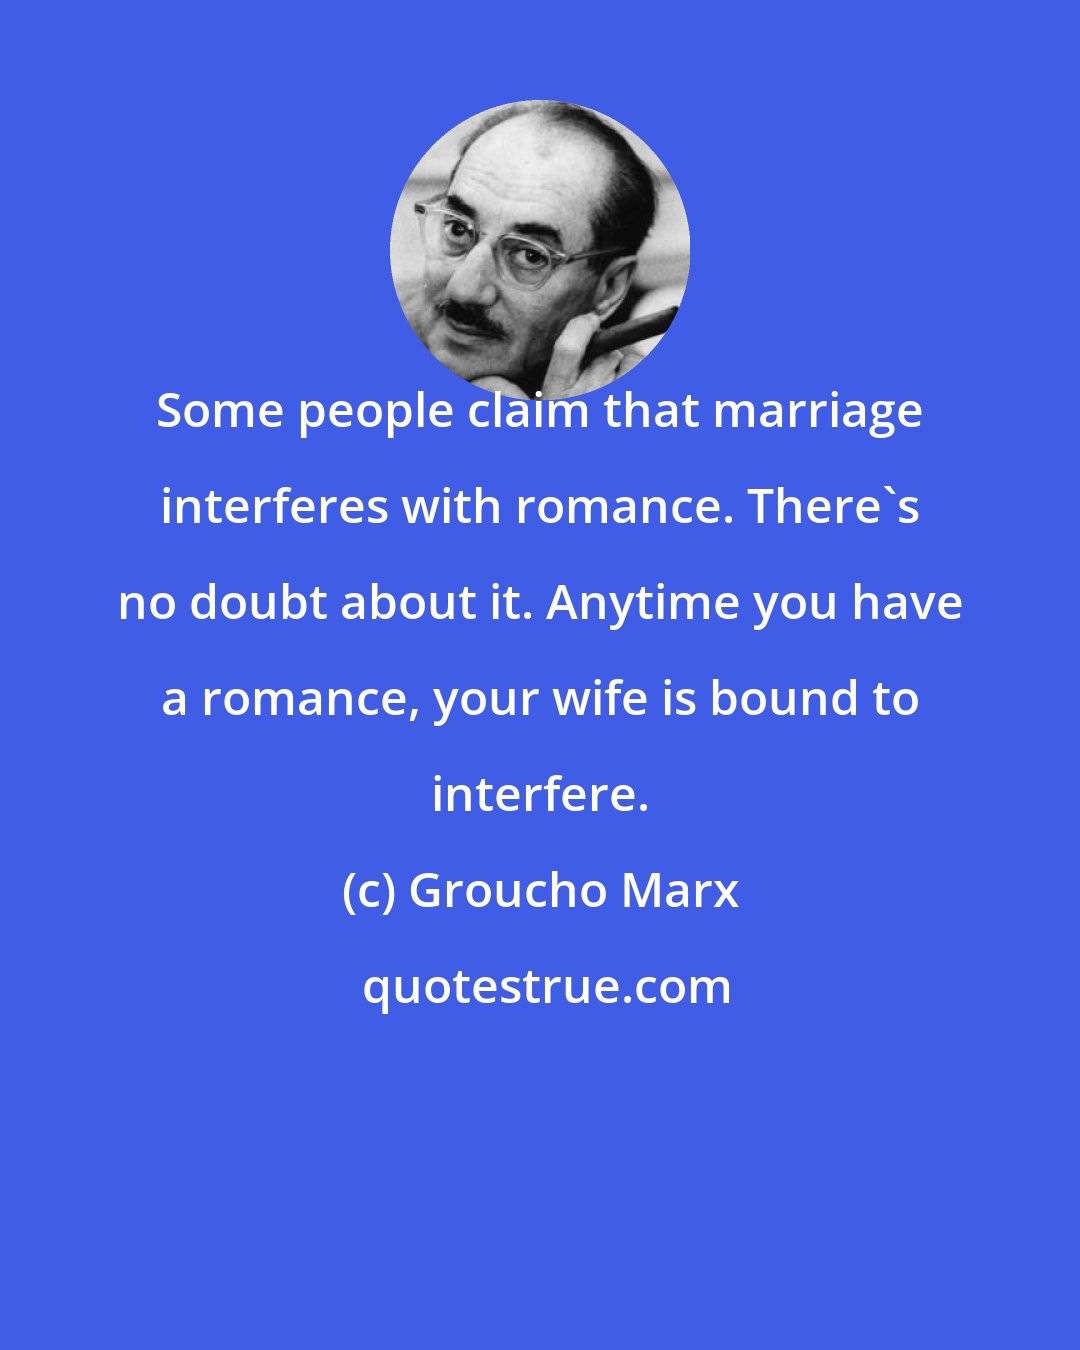 Groucho Marx: Some people claim that marriage interferes with romance. There's no doubt about it. Anytime you have a romance, your wife is bound to interfere.